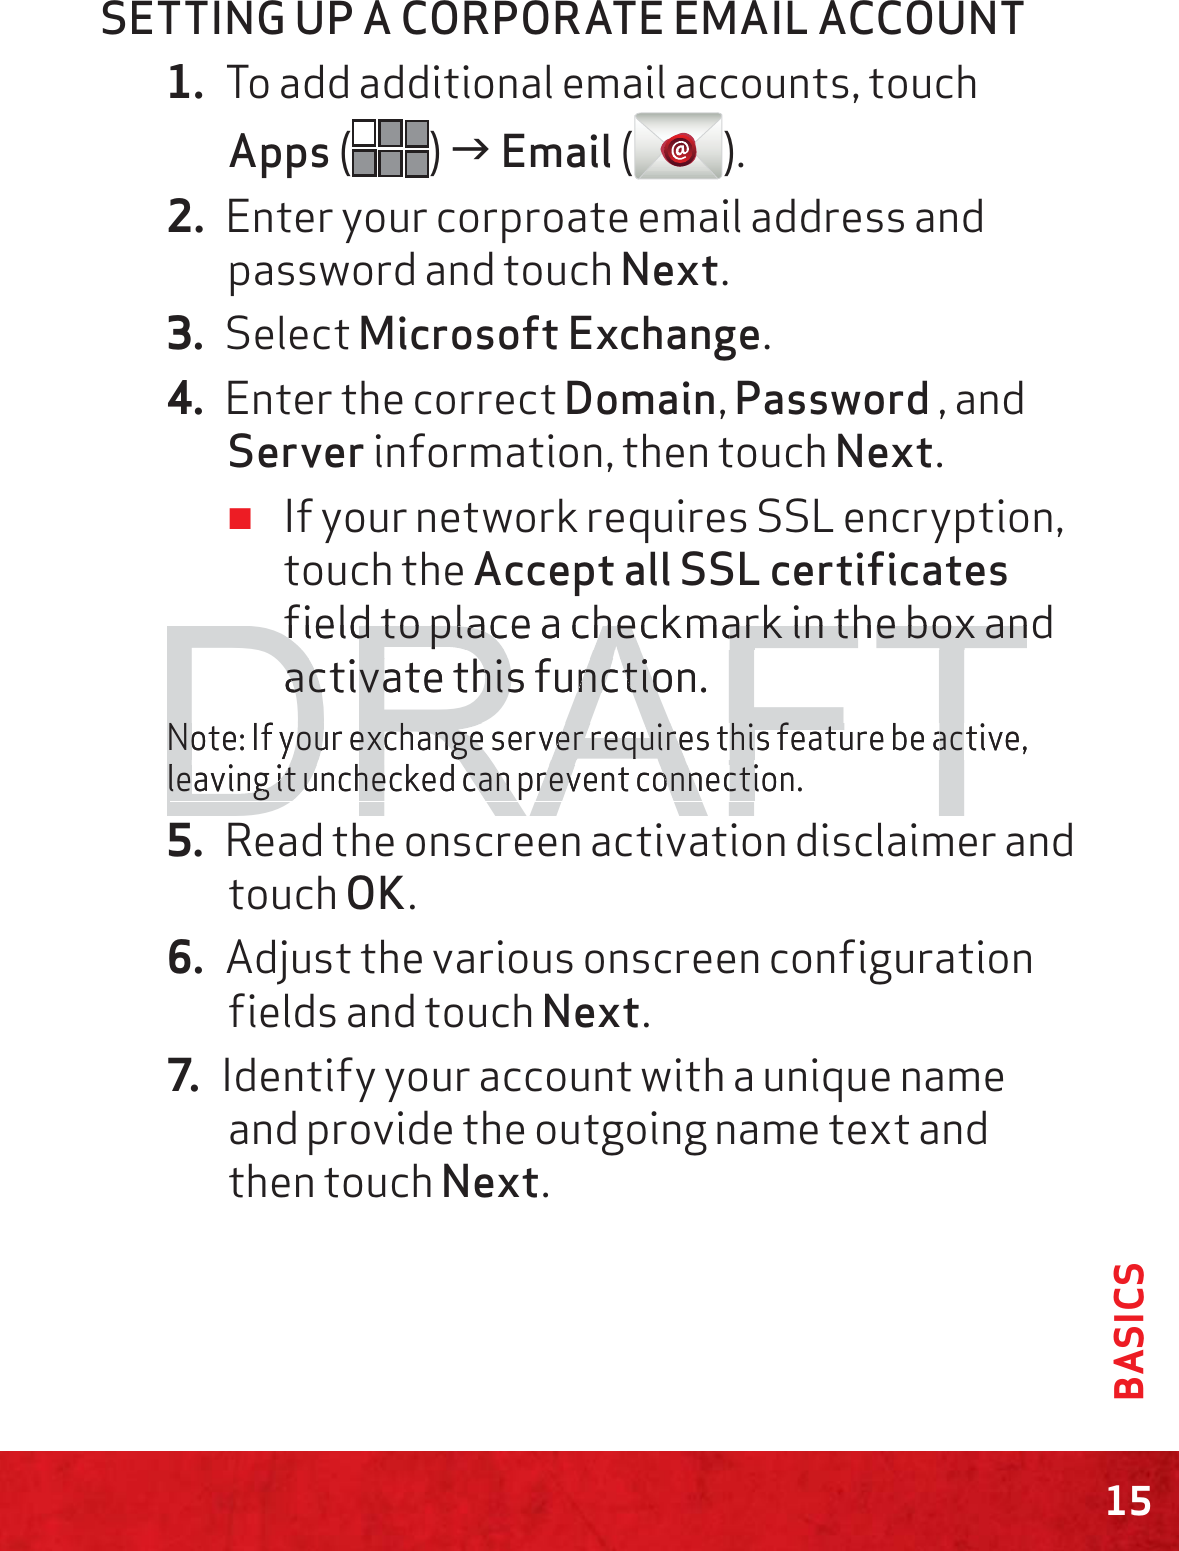 15BASICSSETTING UP A CORPORATE EMAIL ACCOUNT1. To add additional email accounts, touch Apps () J Email ().2. Enter your corproate email address and password and touch Next.3. Select Microsoft Exchange.4. Enter the correct Domain, Password , and Server information, then touch Next. ≠If your network requires SSL encryption, touch the Accept all SSL certificates field to place a checkmark in the box and activate this function.Note: If your exchange server requires this feature be active, leaving it unchecked can prevent connection.5. Read the onscreen activation disclaimer and  touch OK.6. Adjust the various onscreen configuration fields and touch Next.7. Identify your account with a unique name and provide the outgoing name text and then touch Next.DRAFTfield to place a checkmark in the box anfield to place a checkmark in the box anactivate this function.activate this functioNote: If your exchange server requires this feature be active,Note: If your exchange server requires this feature be acleaving it unchecked can prevent connection.leaving it unchecked can prevent connecti